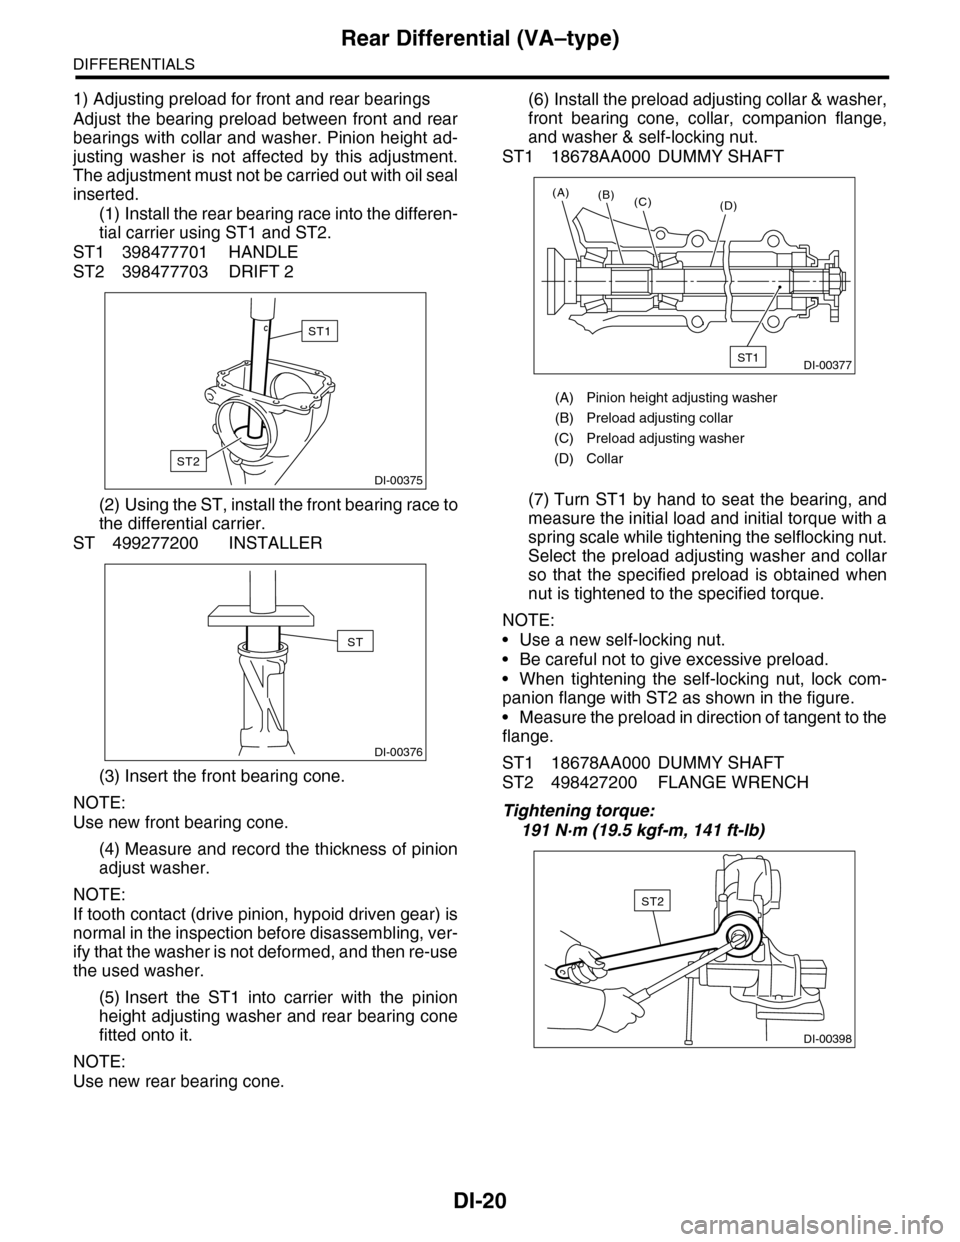 SUBARU TRIBECA 2009 1.G Service User Guide DI-20
Rear Differential (VA–type)
DIFFERENTIALS
1) Adjusting preload for front and rear bearings
Adjust the bearing preload between front and rear
bearings with collar and washer. Pinion height ad-
